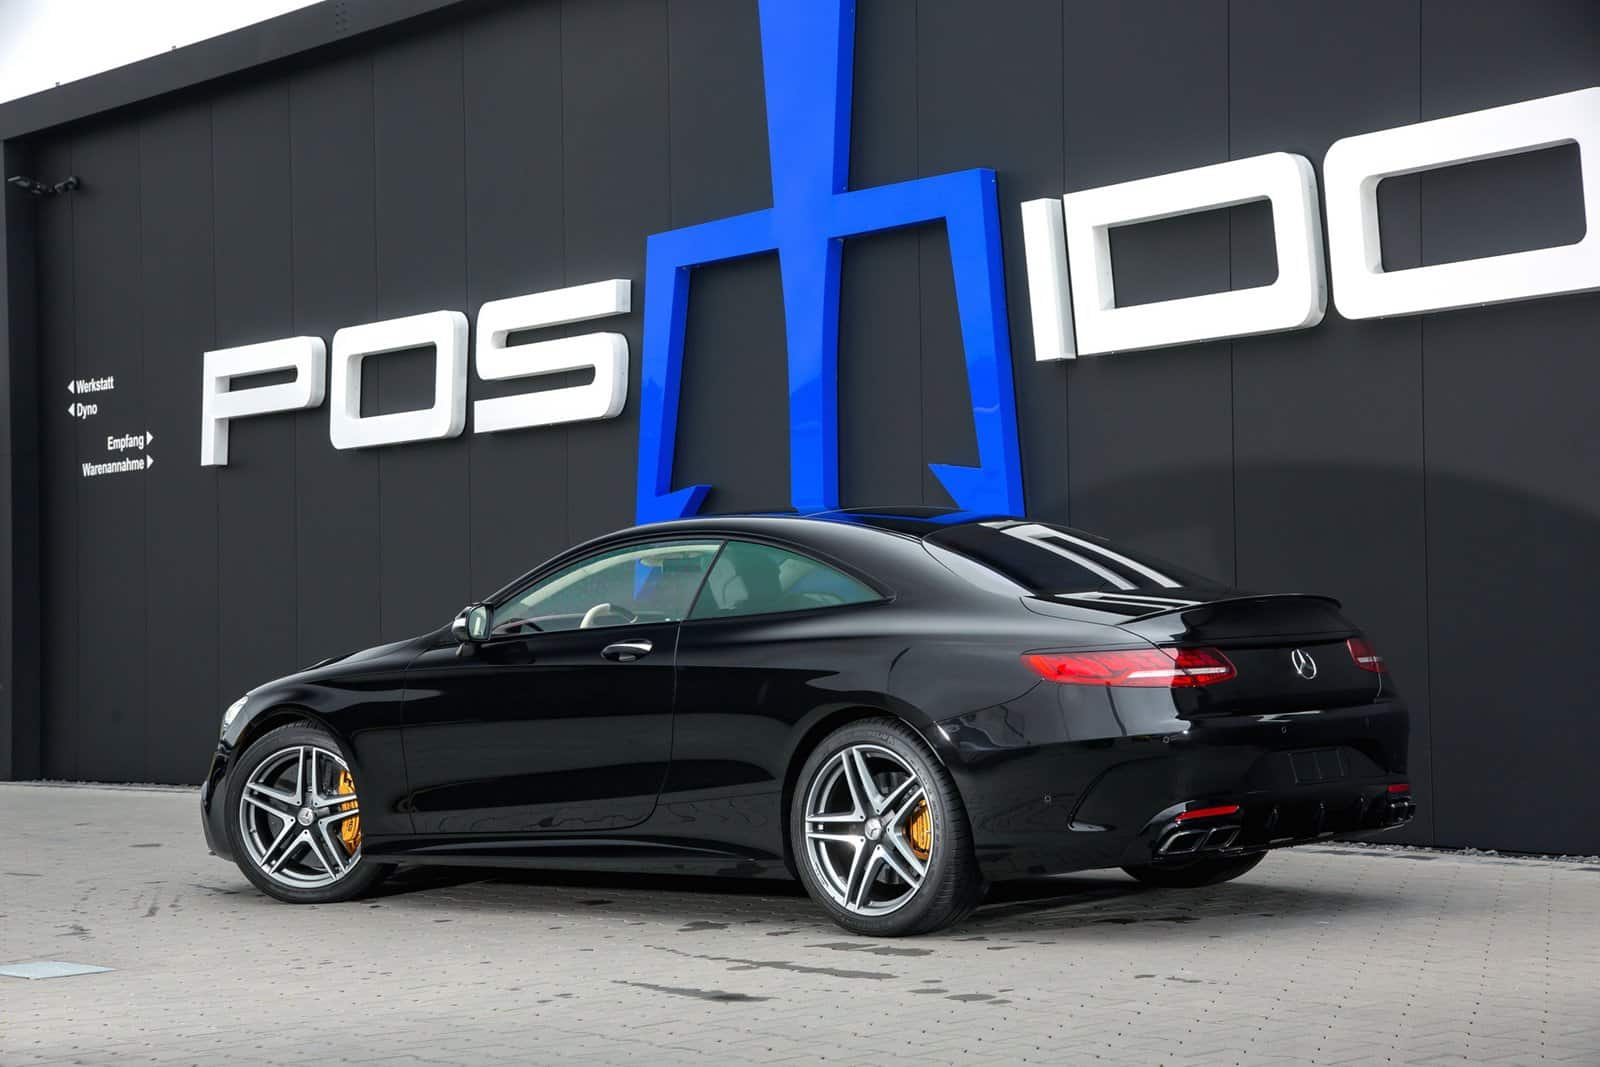 For € 52,000 you can raise the power of your Mercedes-AMG S 63 Coupe to 940 hp. Reasonable?